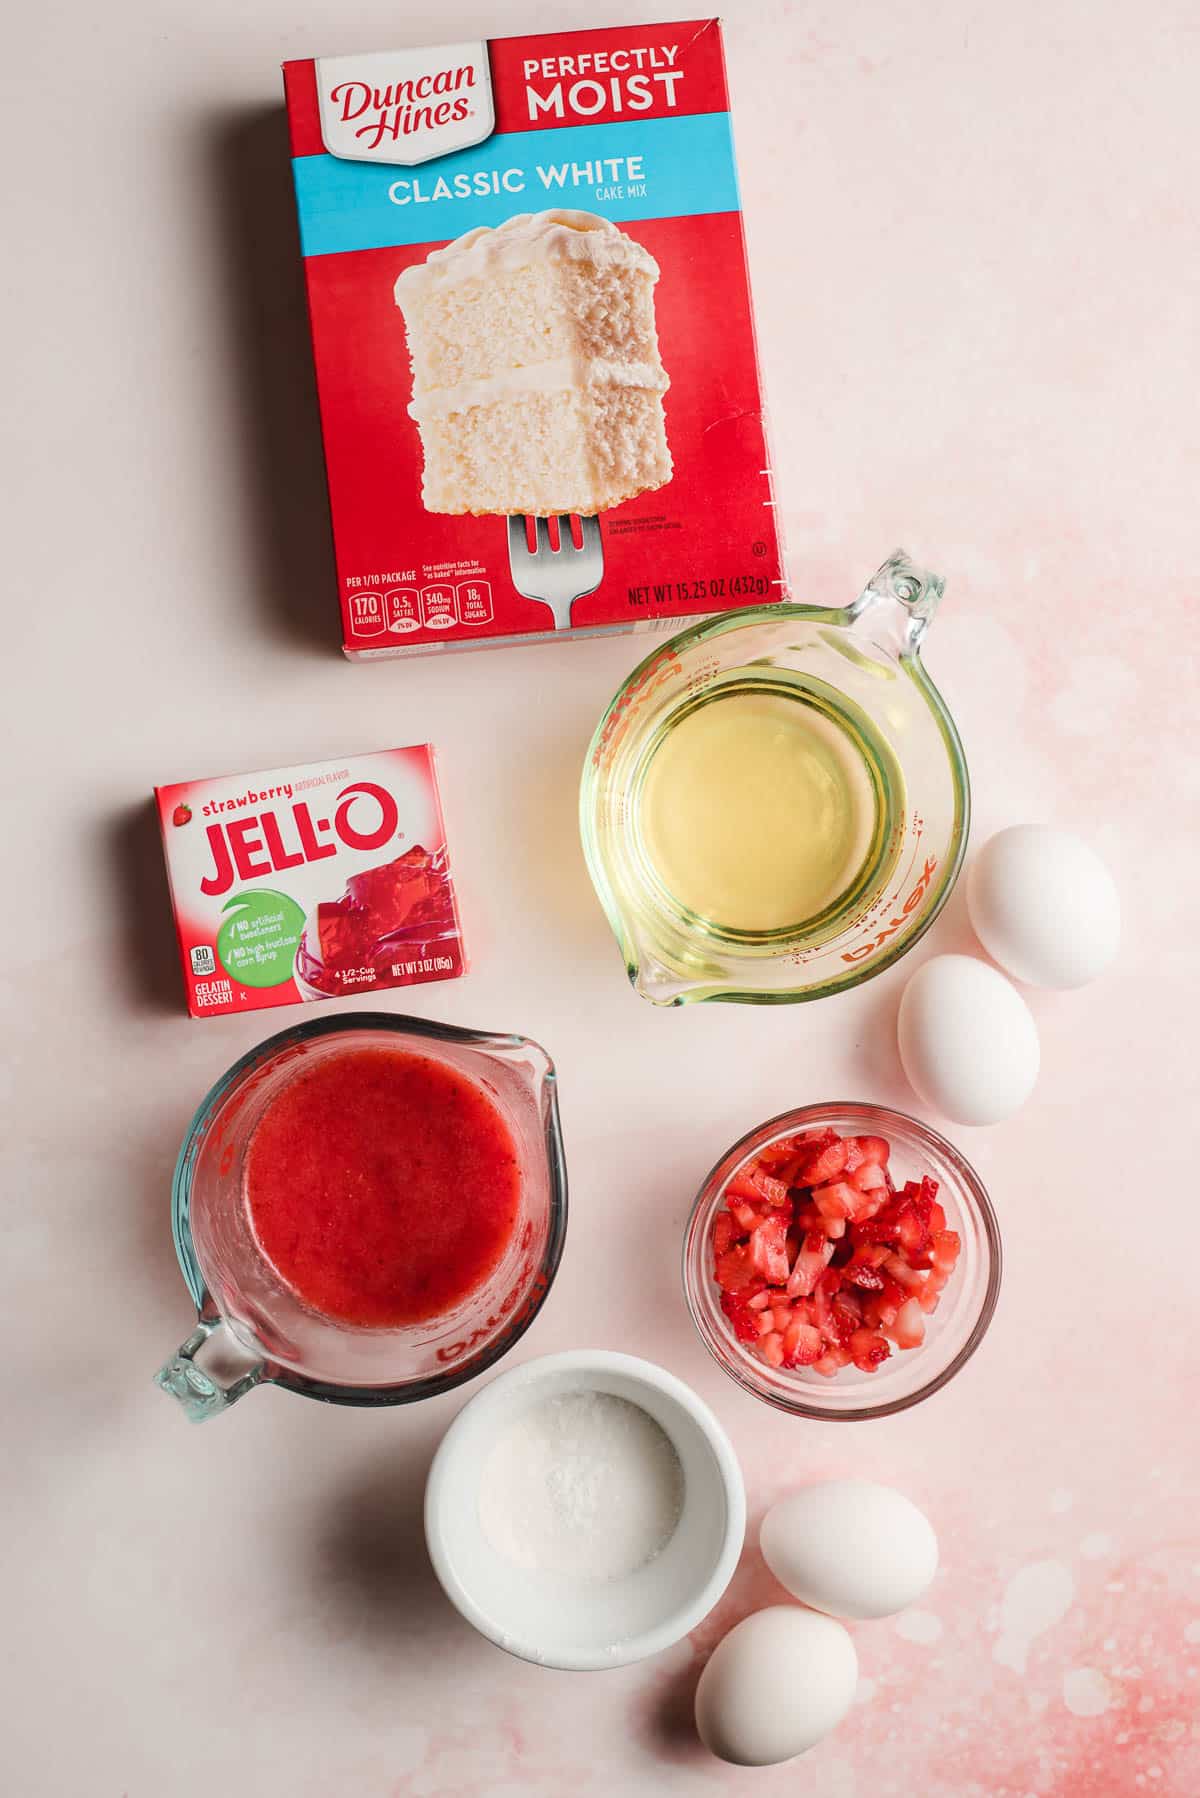 White cake mix, strawberry jello, pureed strawberries, eggs, oil, flour, and diced strawberries on a pink background.